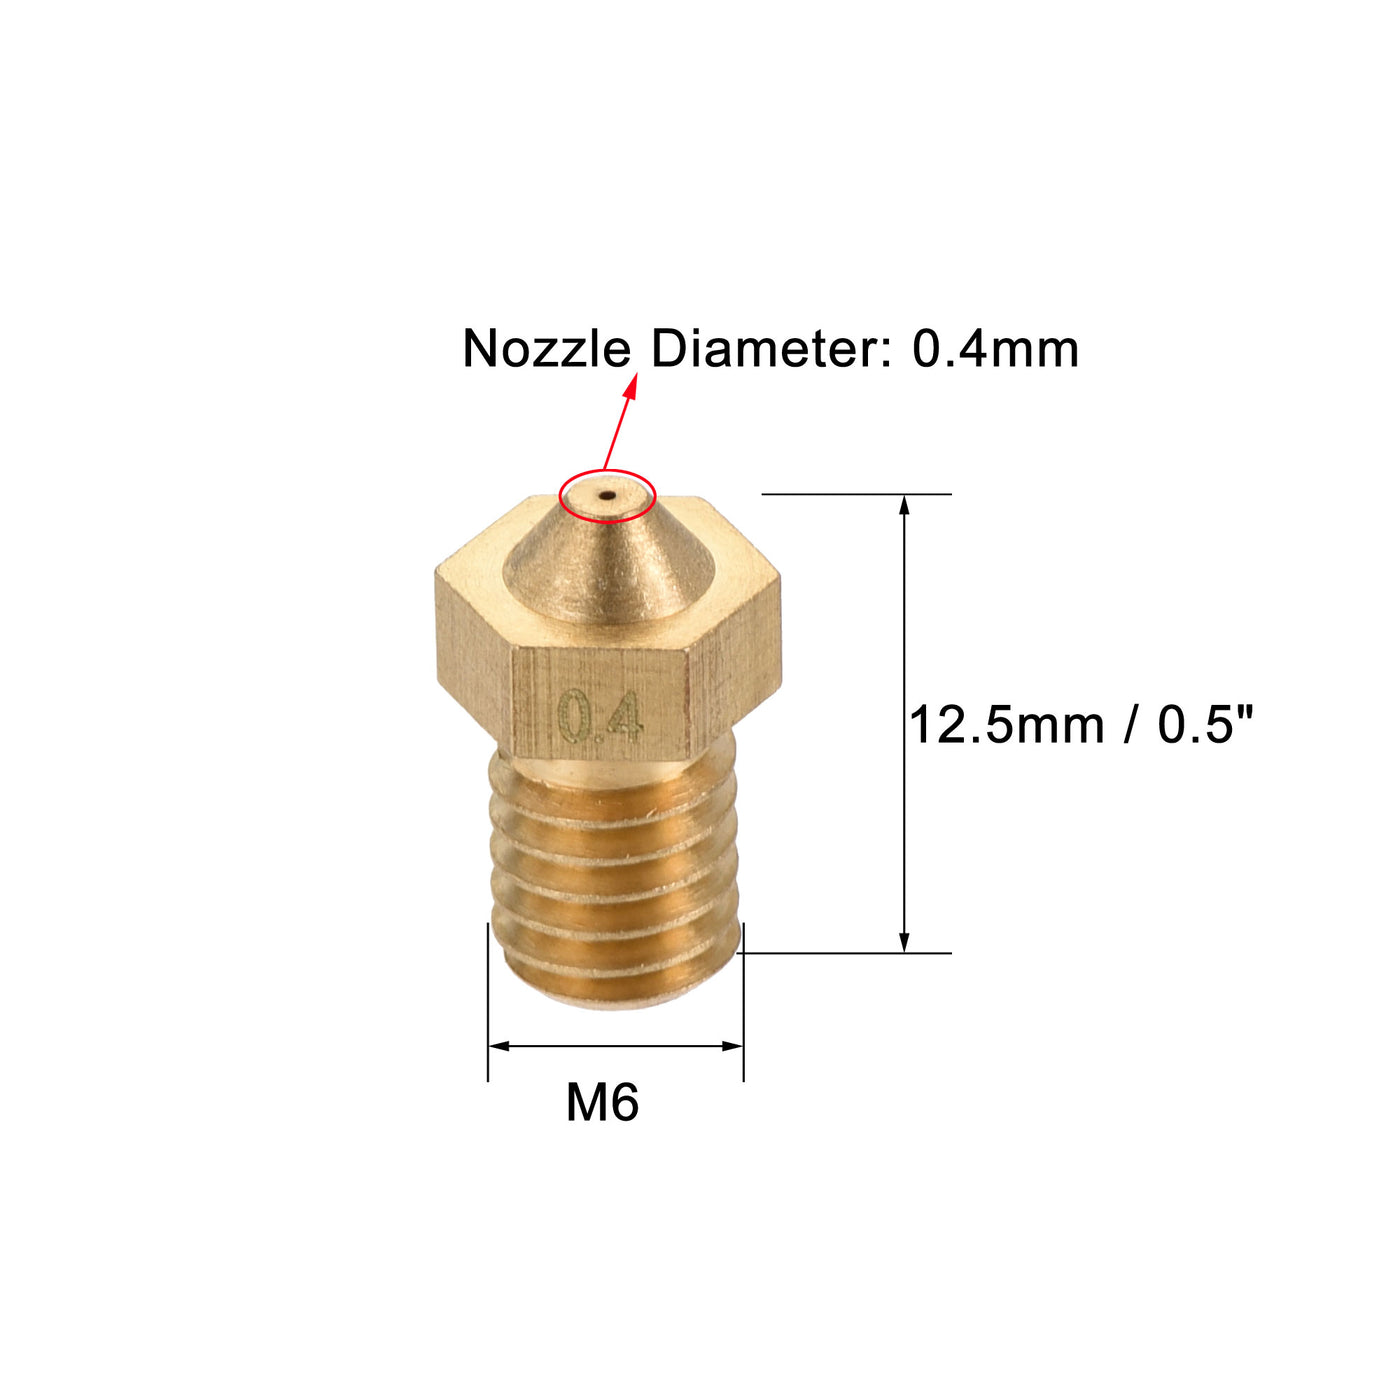 uxcell Uxcell 0.4mm 3D Printer Nozzle, 20pcs M6 Thread for V5 V6 1.75mm Extruder Print, Brass